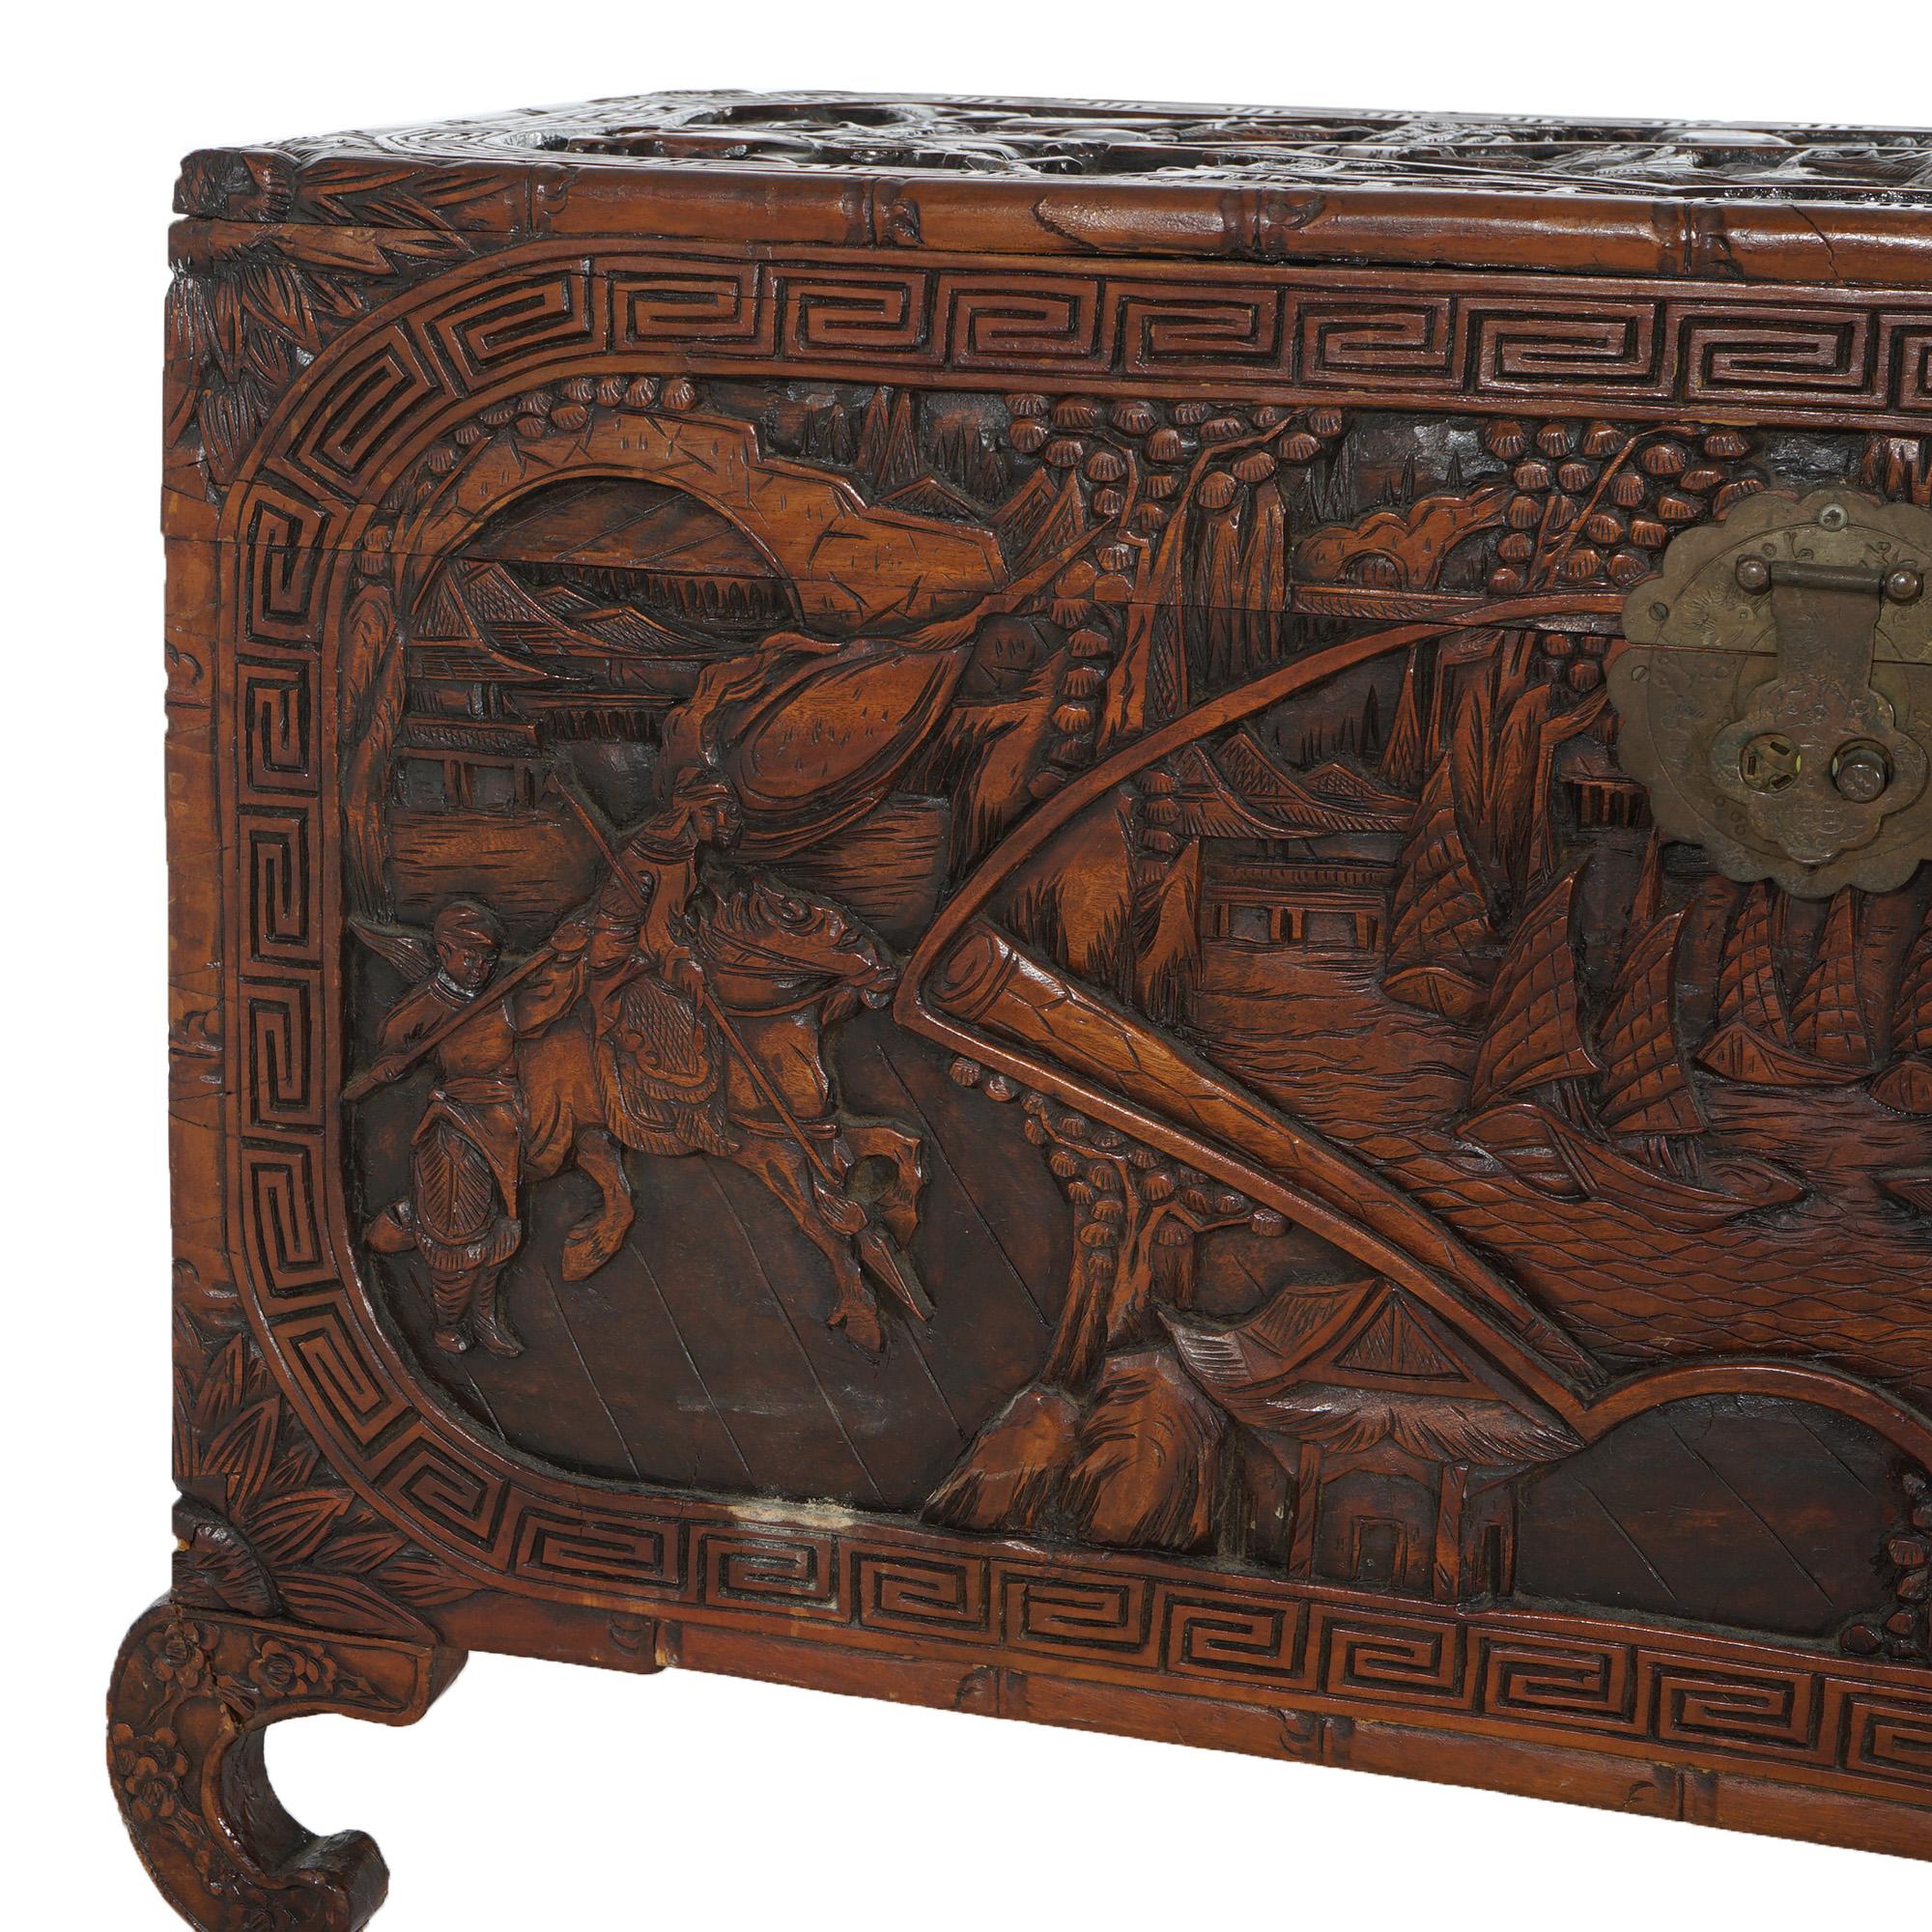 Antique Chinese Carved Hardwood Chest with Figures & Scenes in Relief C1920 For Sale 1